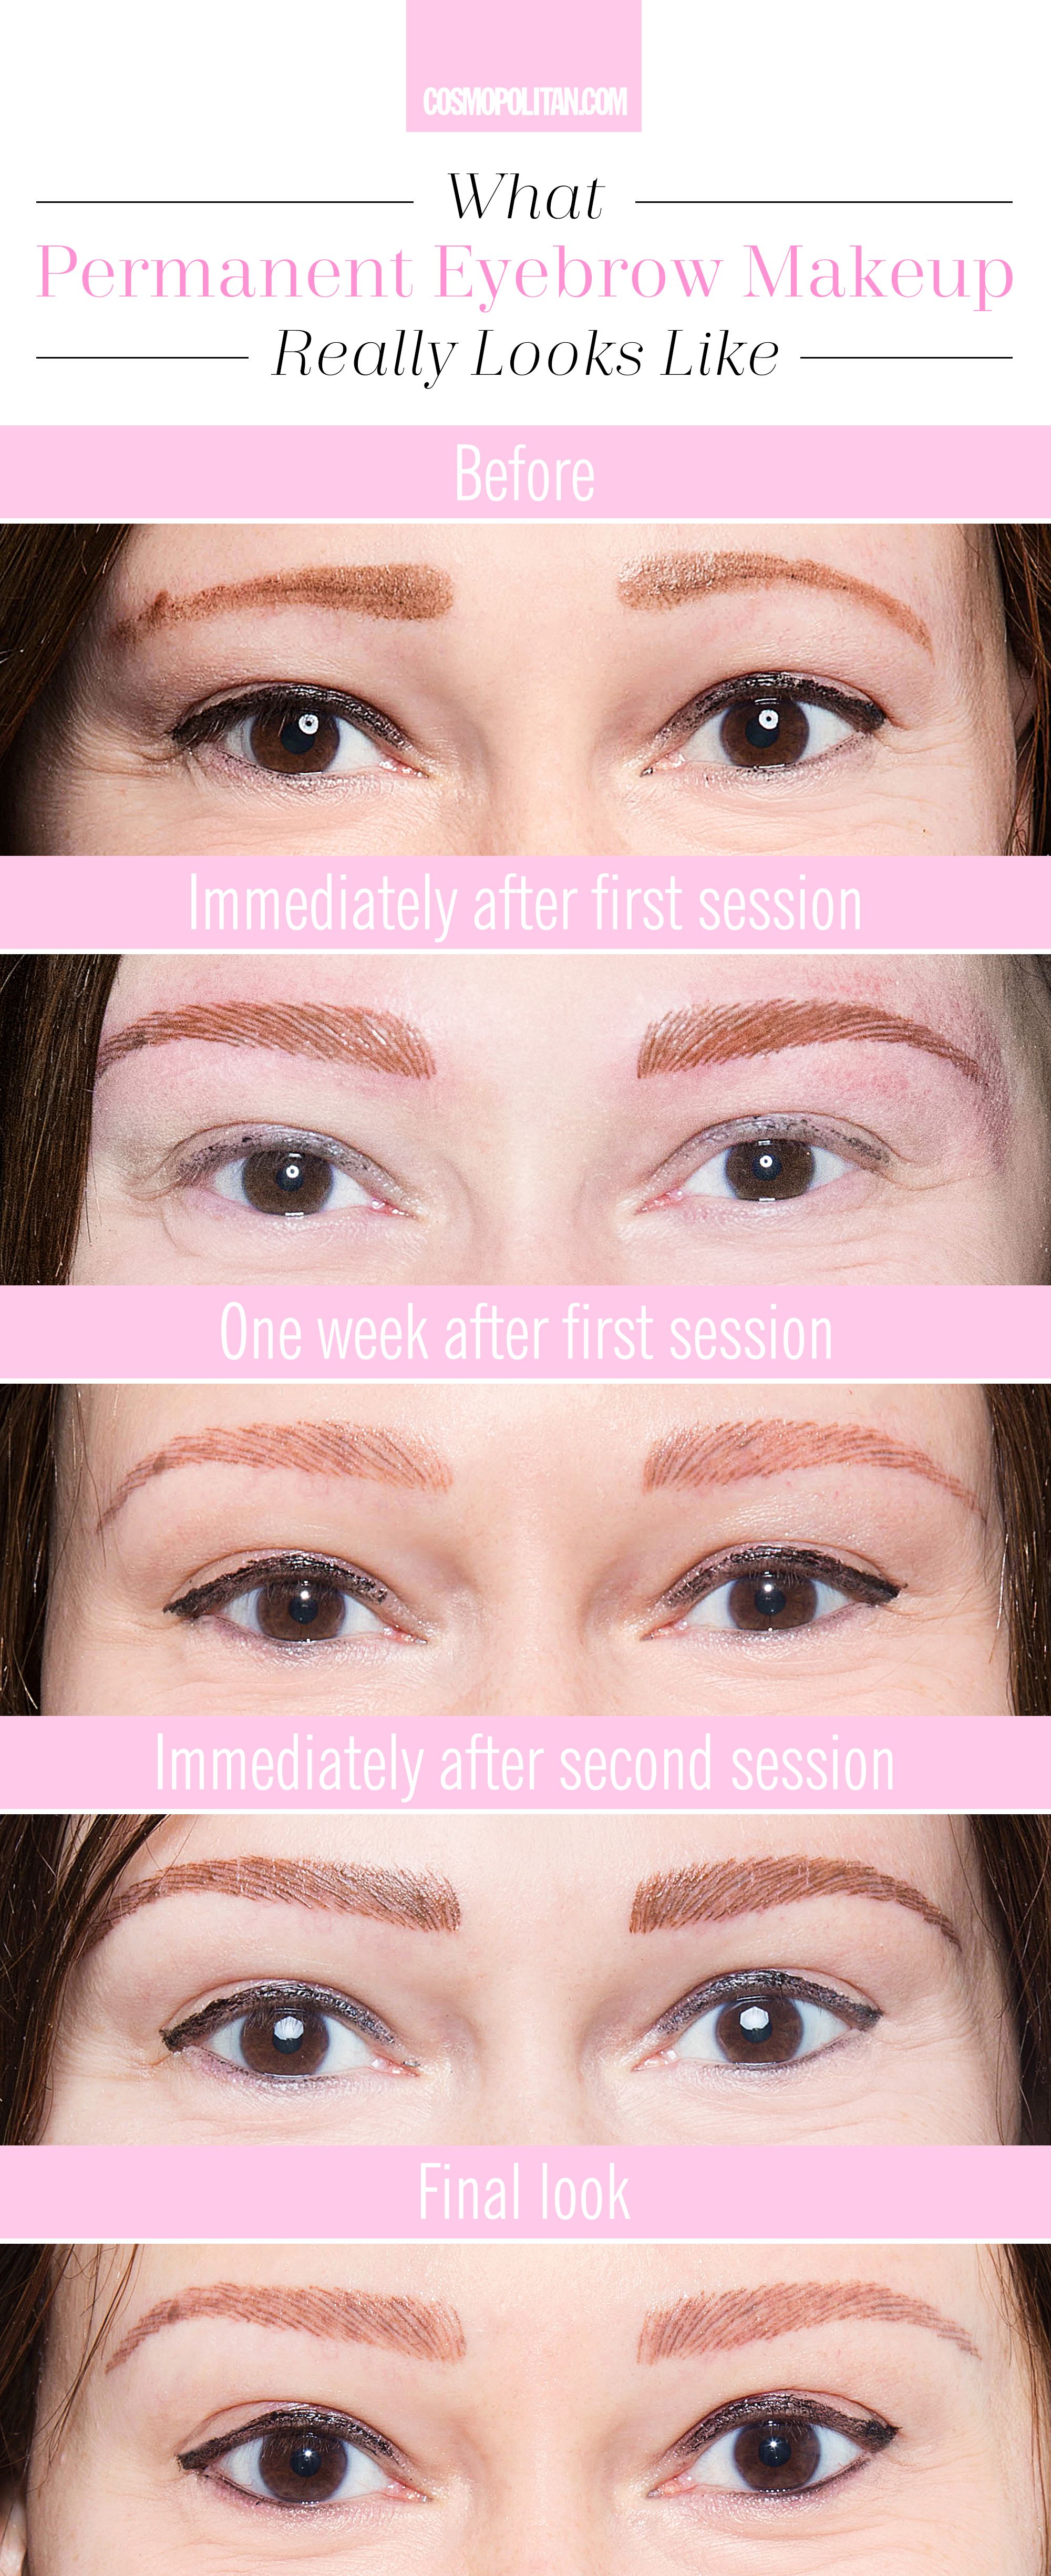 What Its Really Like to Get Permanent Eyebrow Makeup  Permanent Makeup